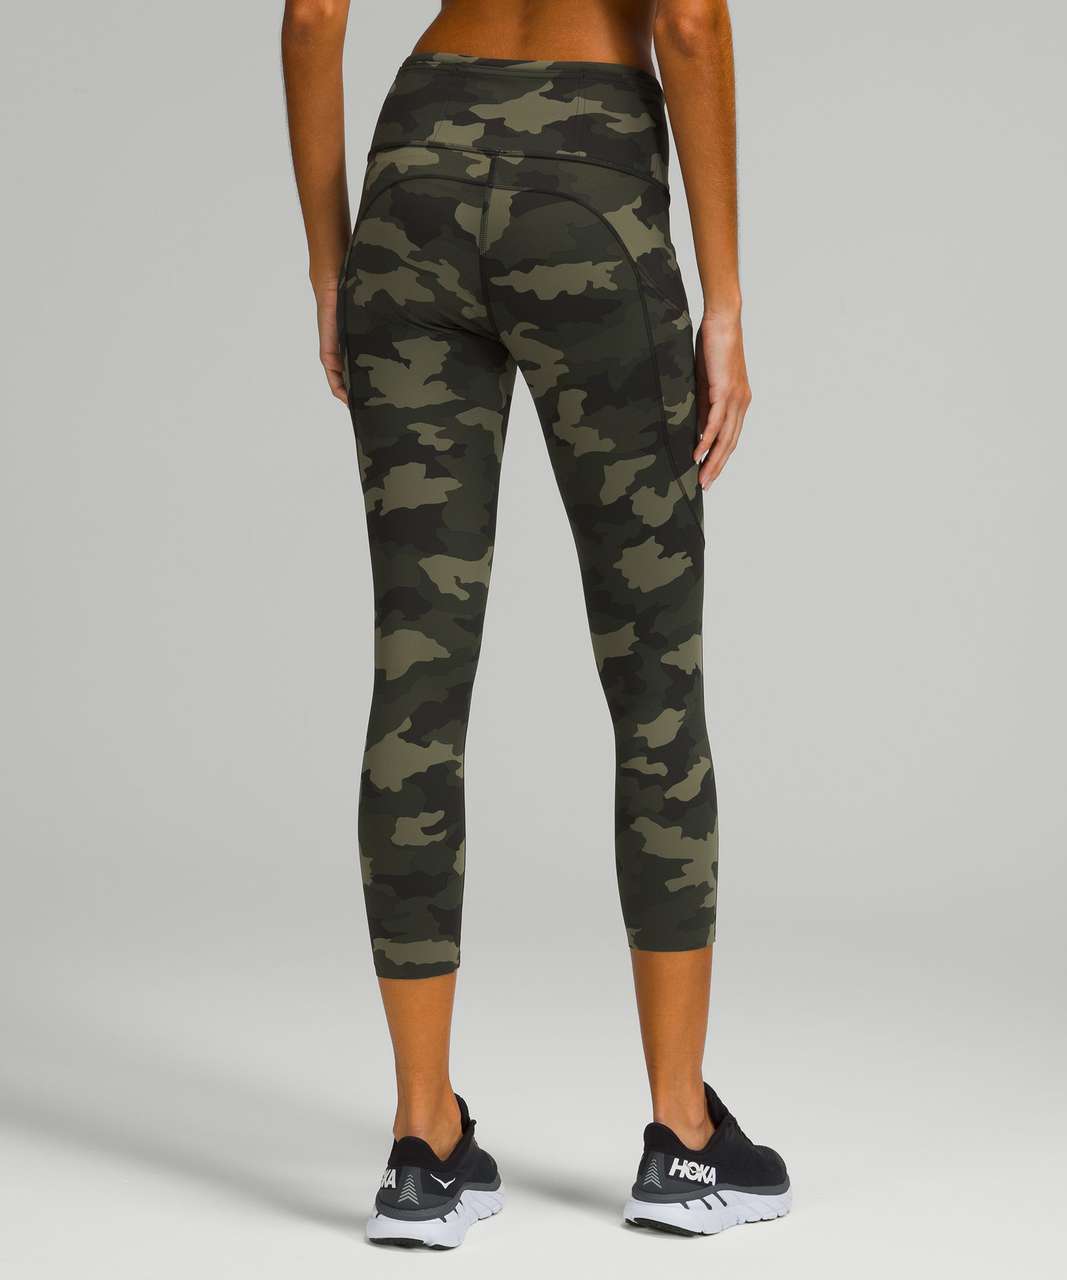 Lululemon fast and free leggings 23” camo size 4, Women's Fashion,  Activewear on Carousell